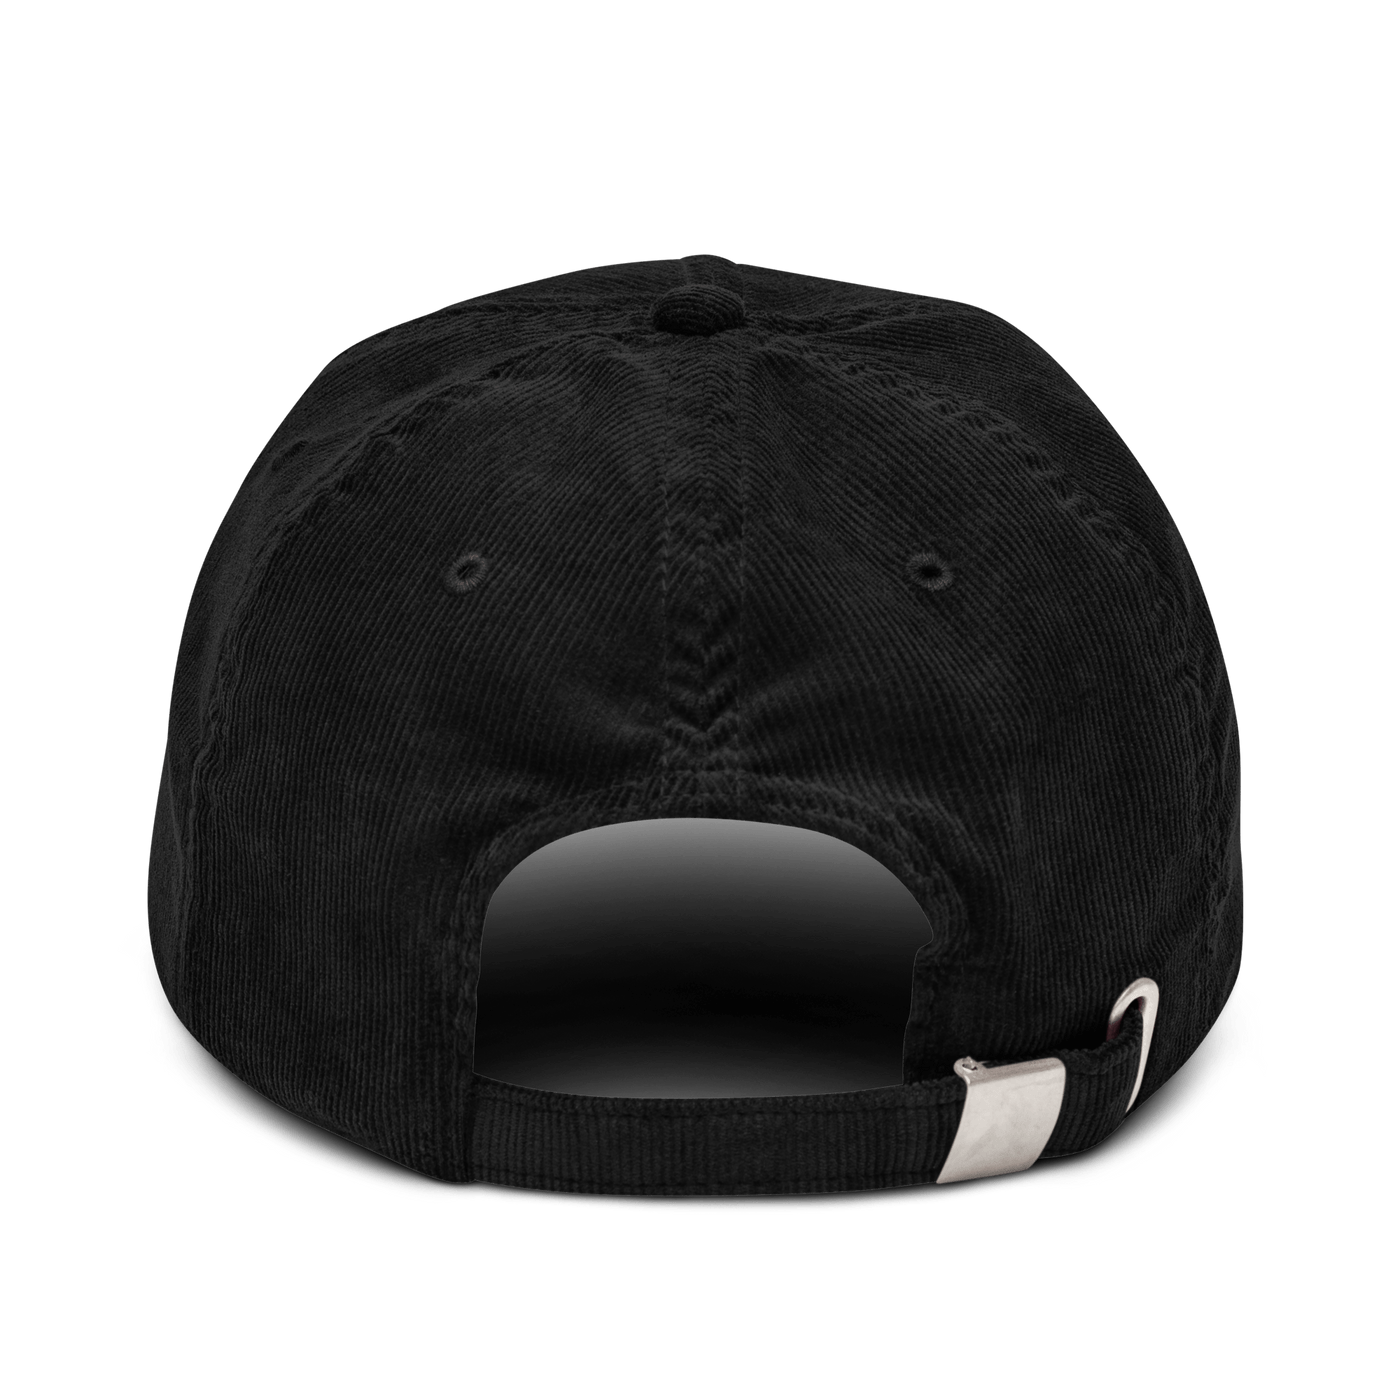 FAKE Corduroy hat - Black - - Just Another Cap Store